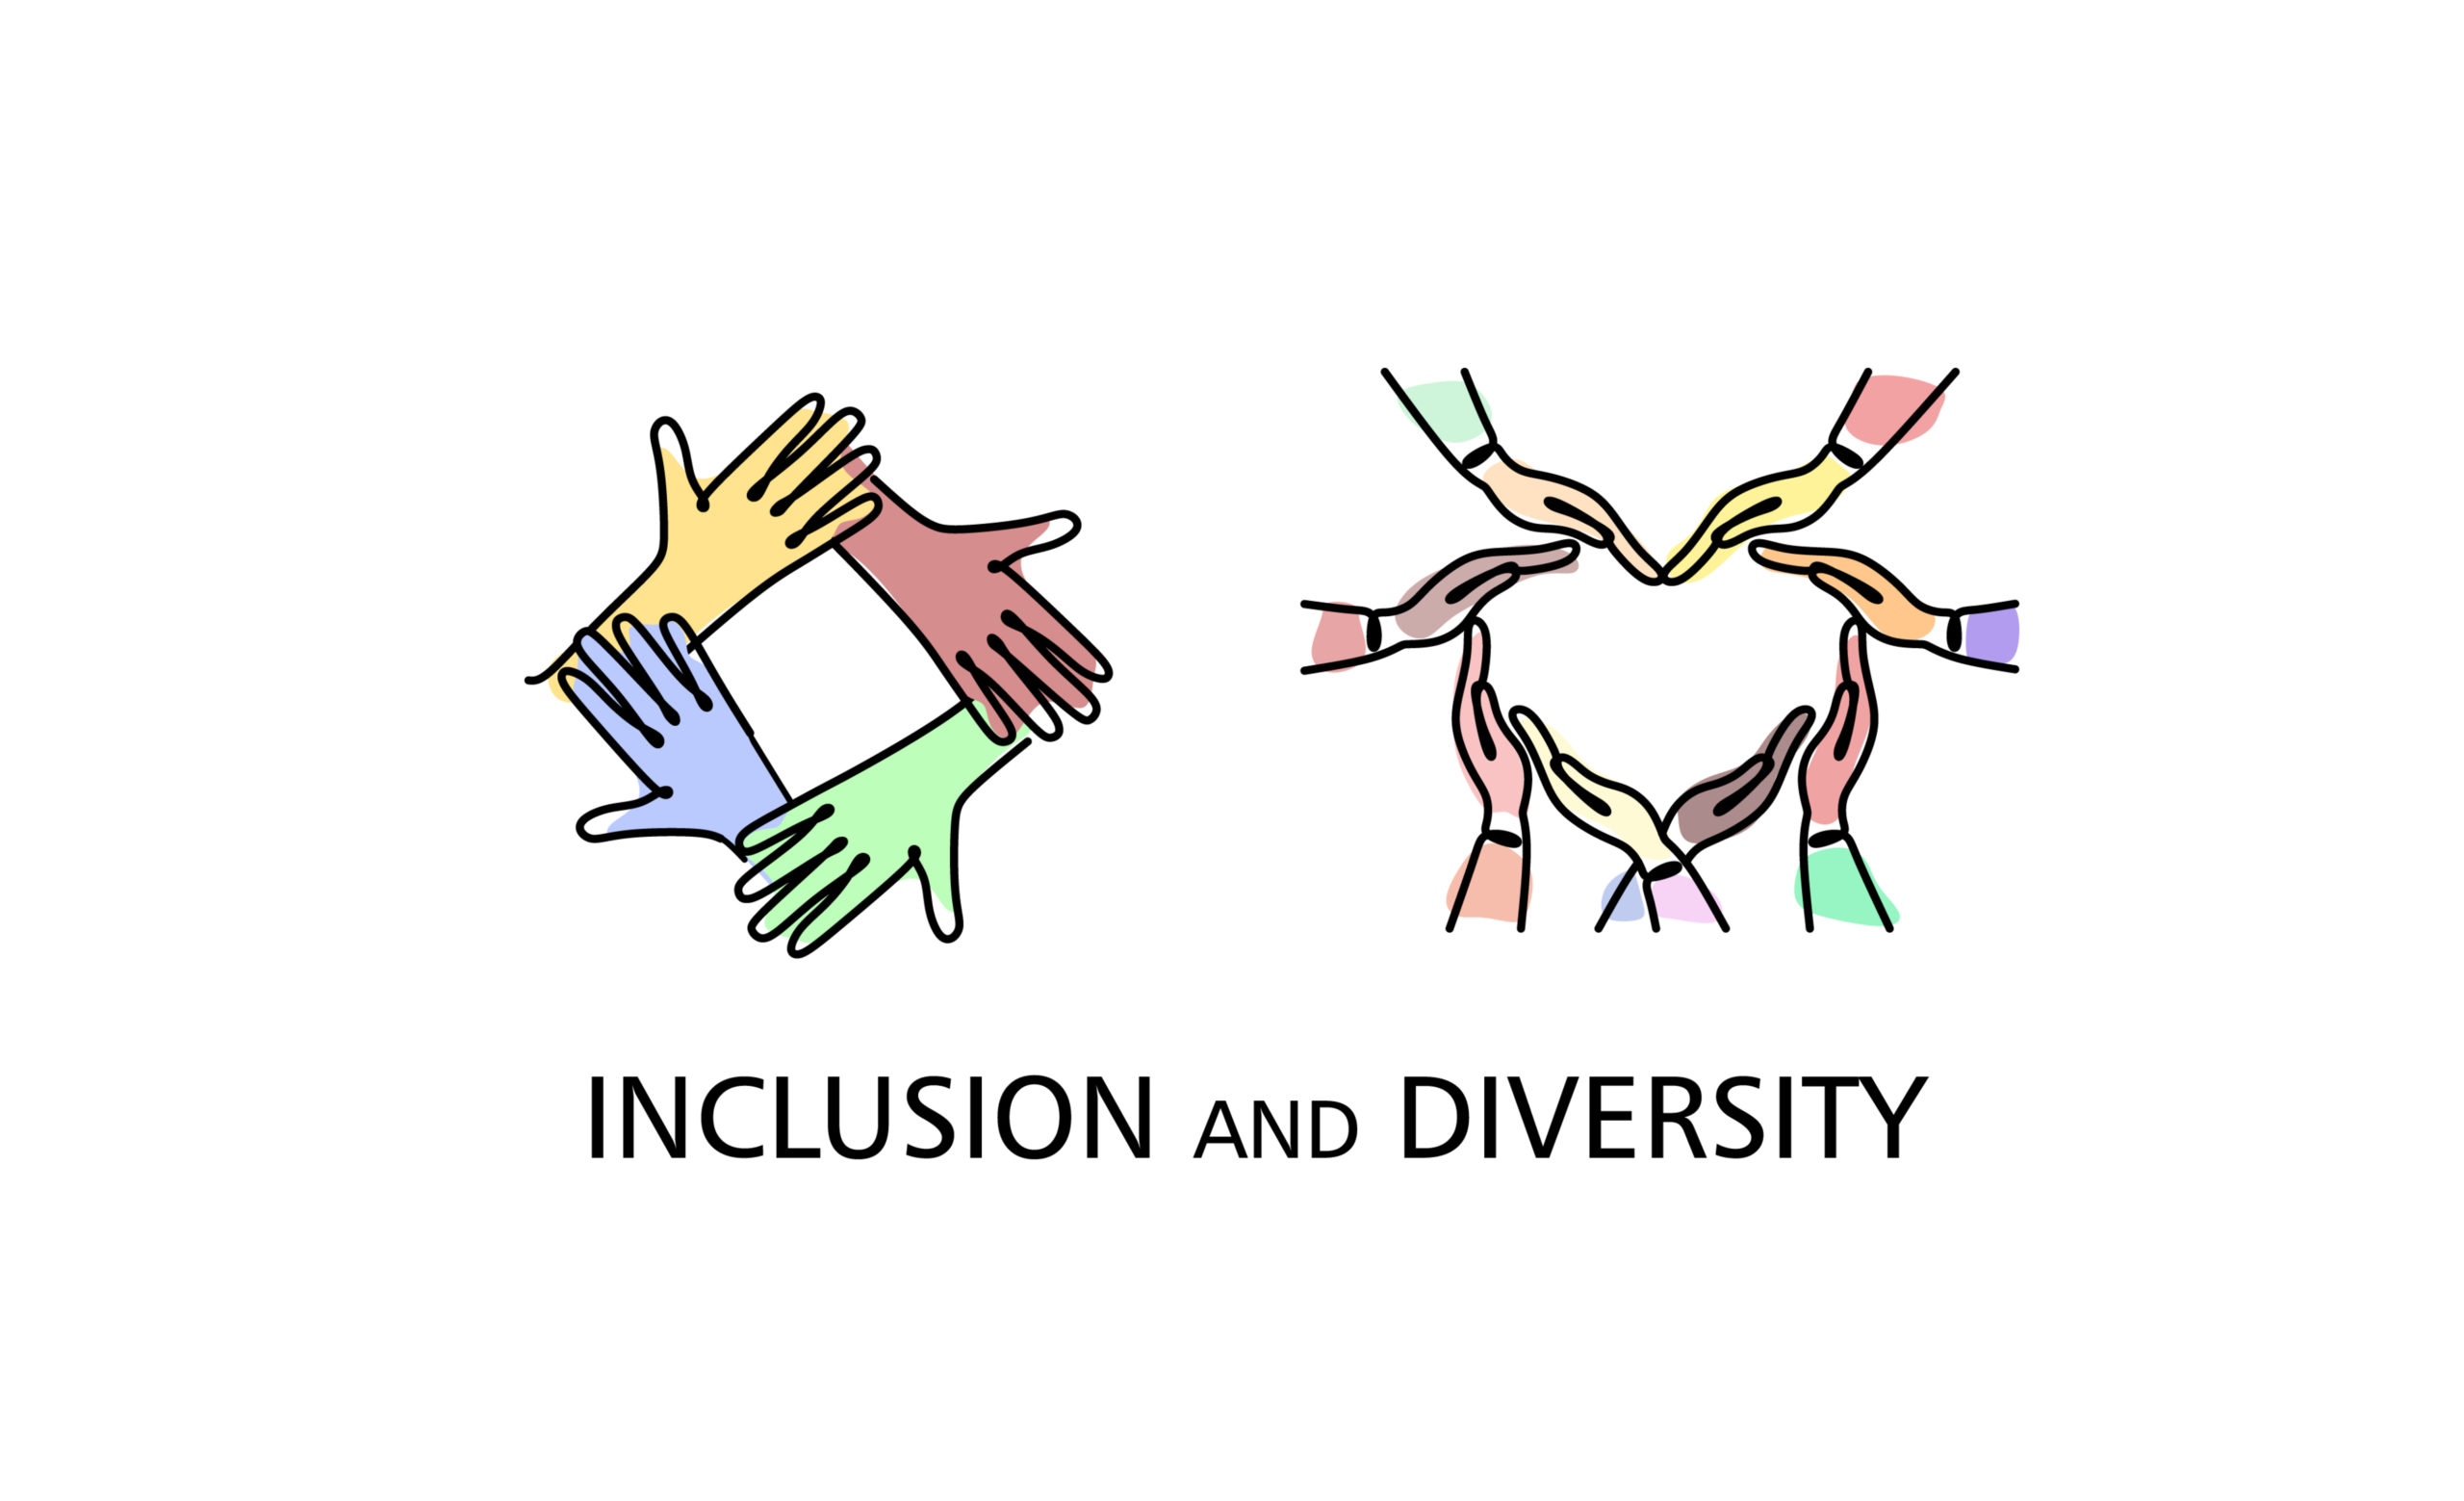 inclusion and diversity with hands coming together